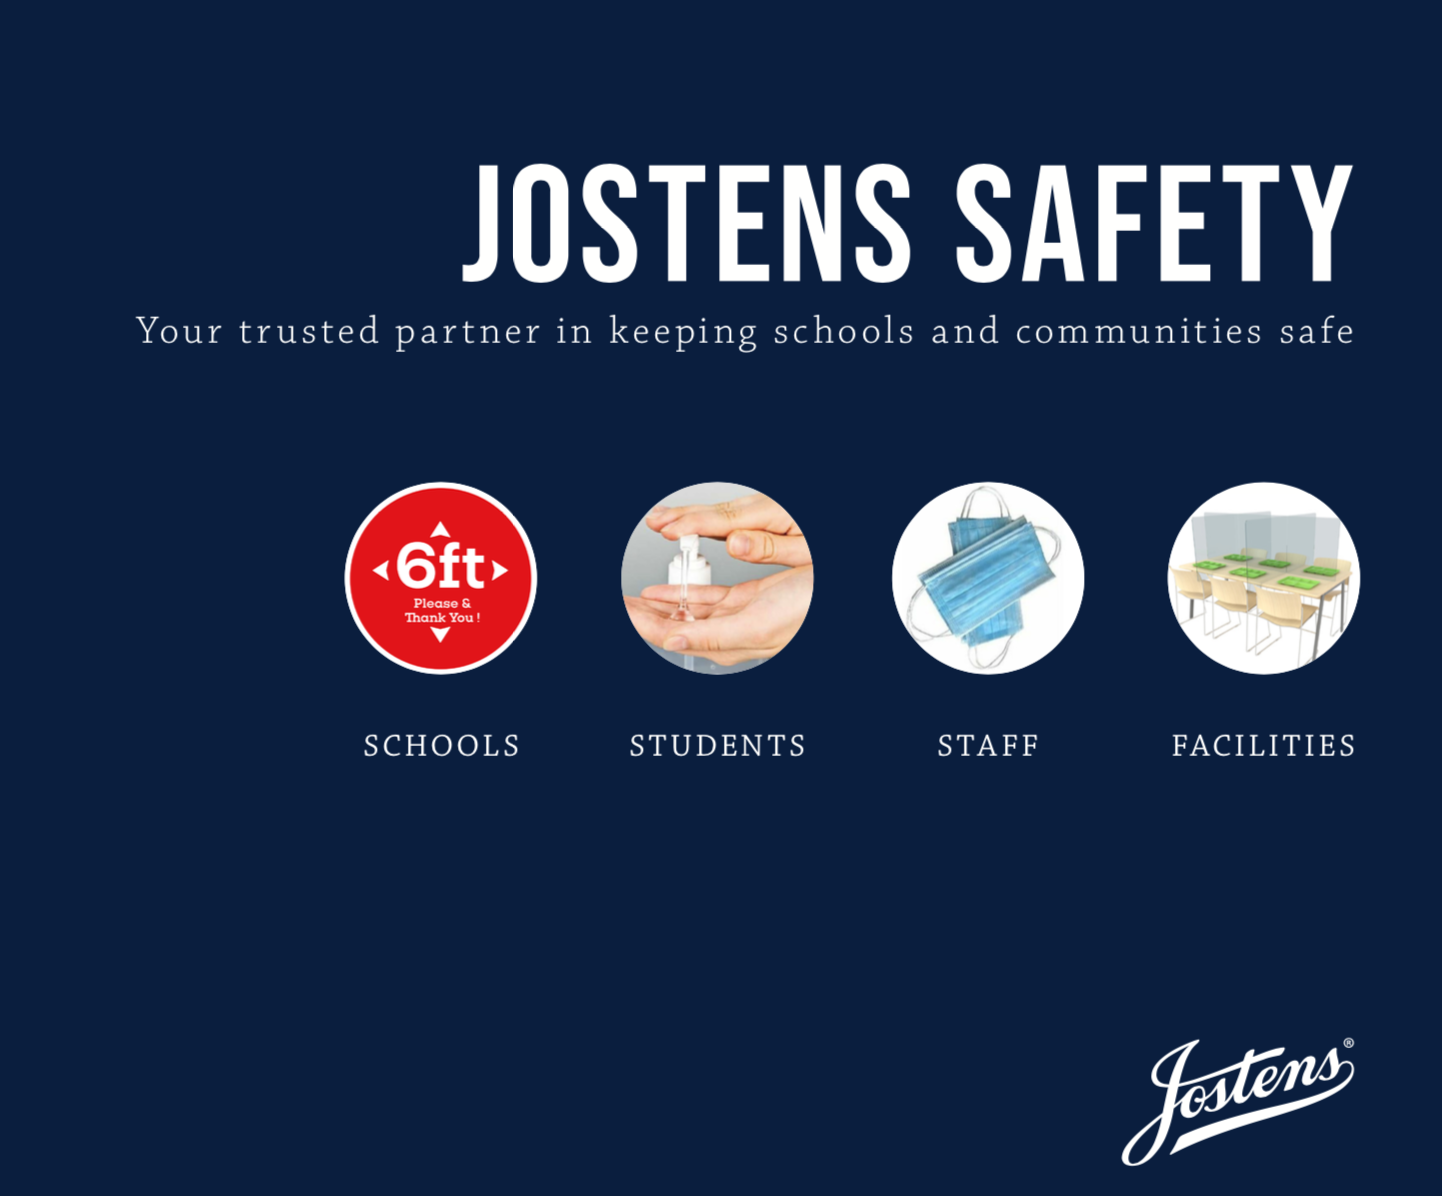 Jostens new line of environmental and personal safety products is available at https://safety.jostens.com